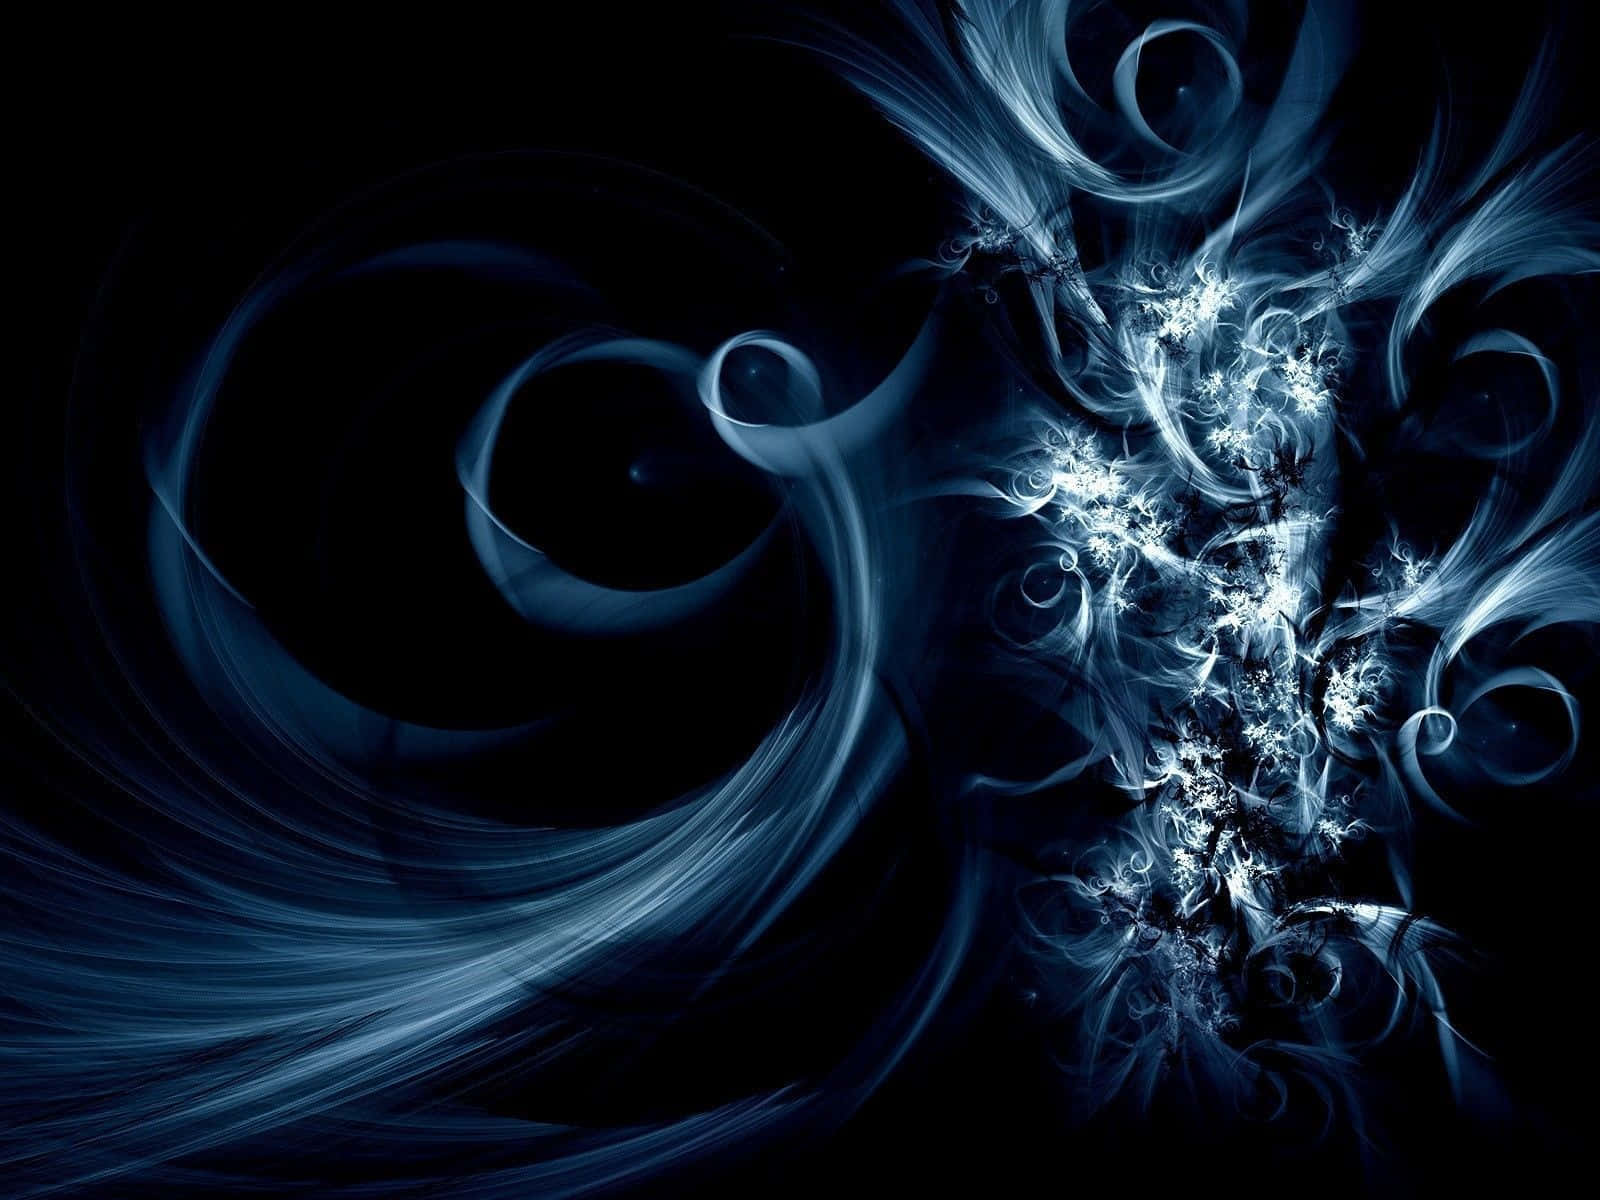 A Blue Abstract Design On A Black Background Background